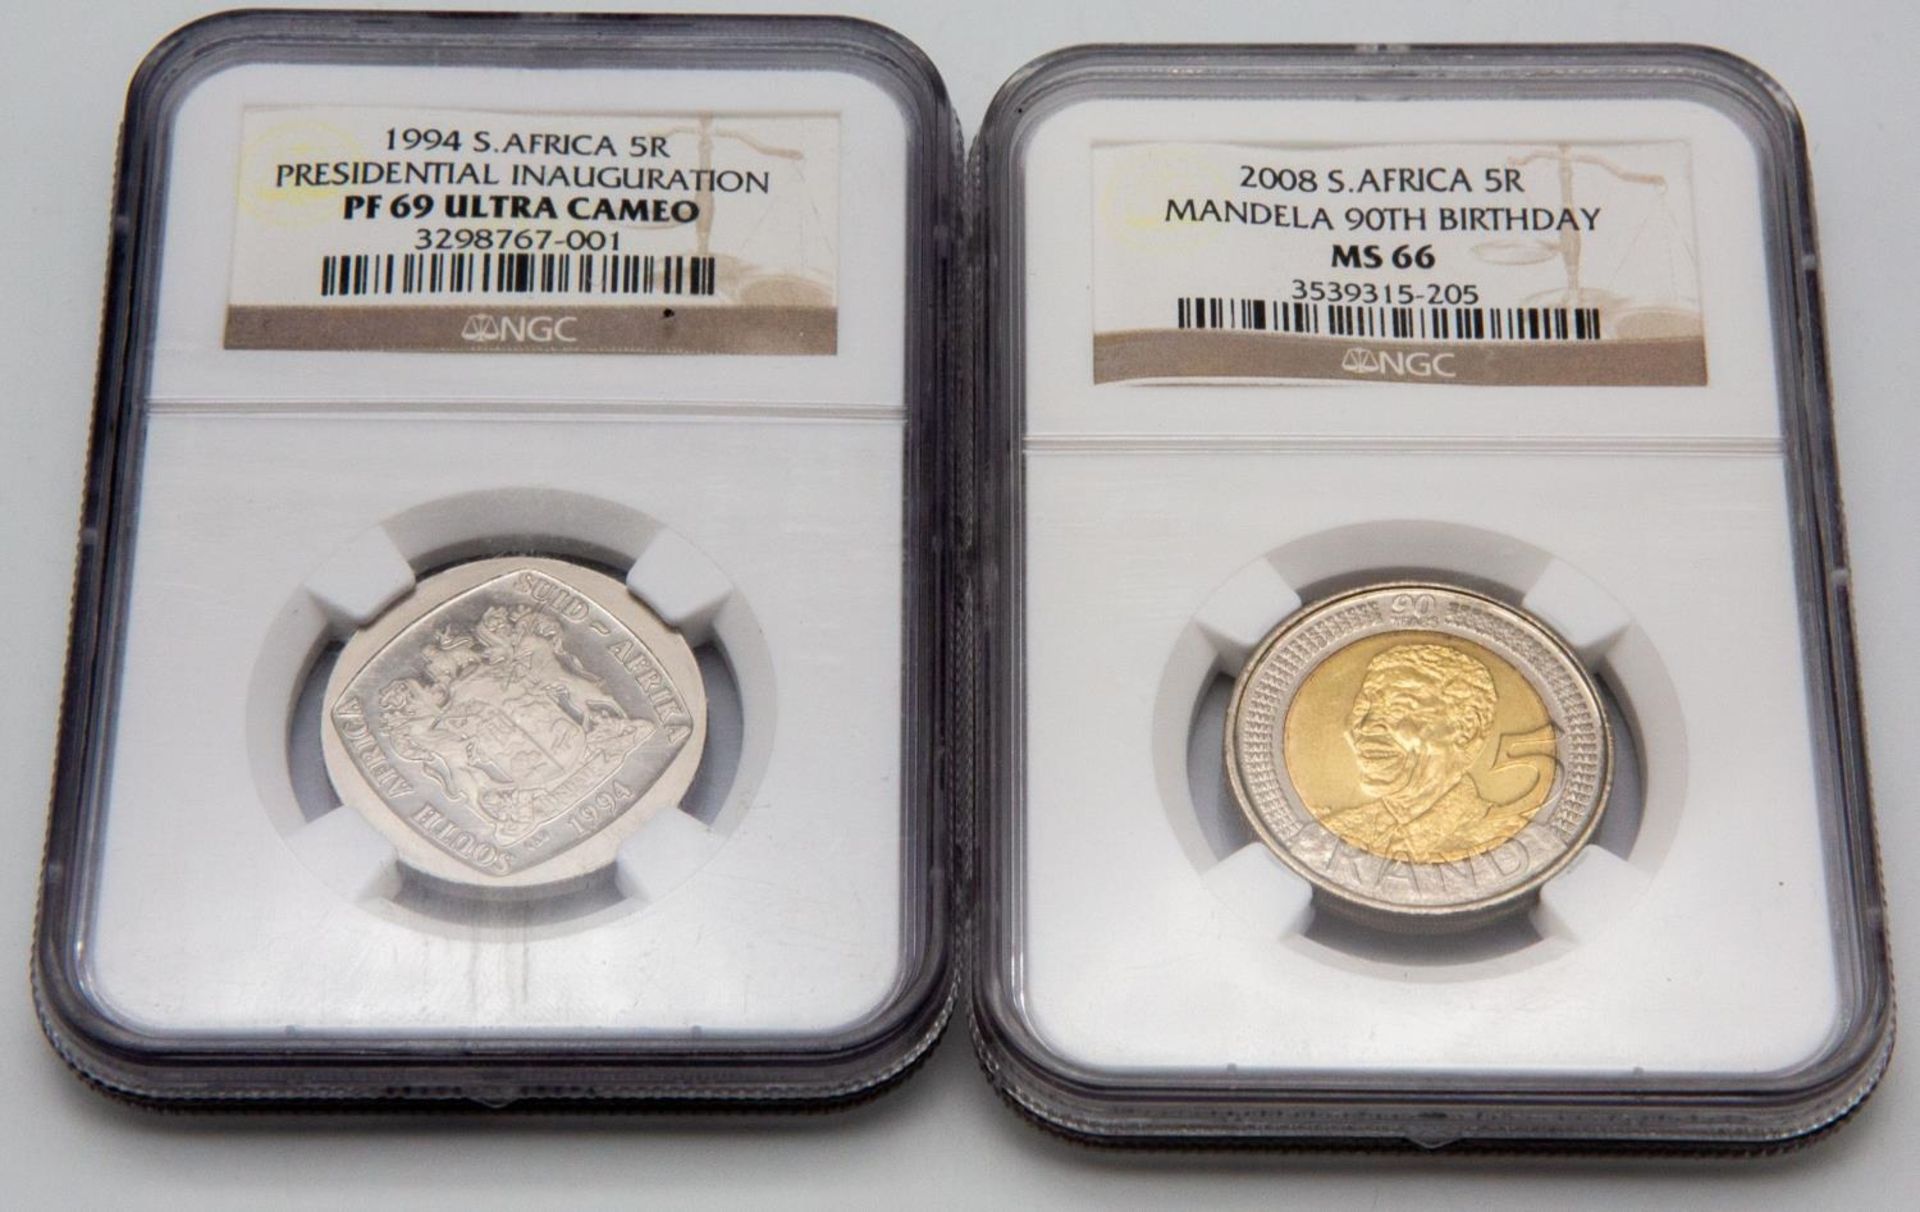 Two Commemorative NGC Sealed Proof Nelson Mandela Coins.